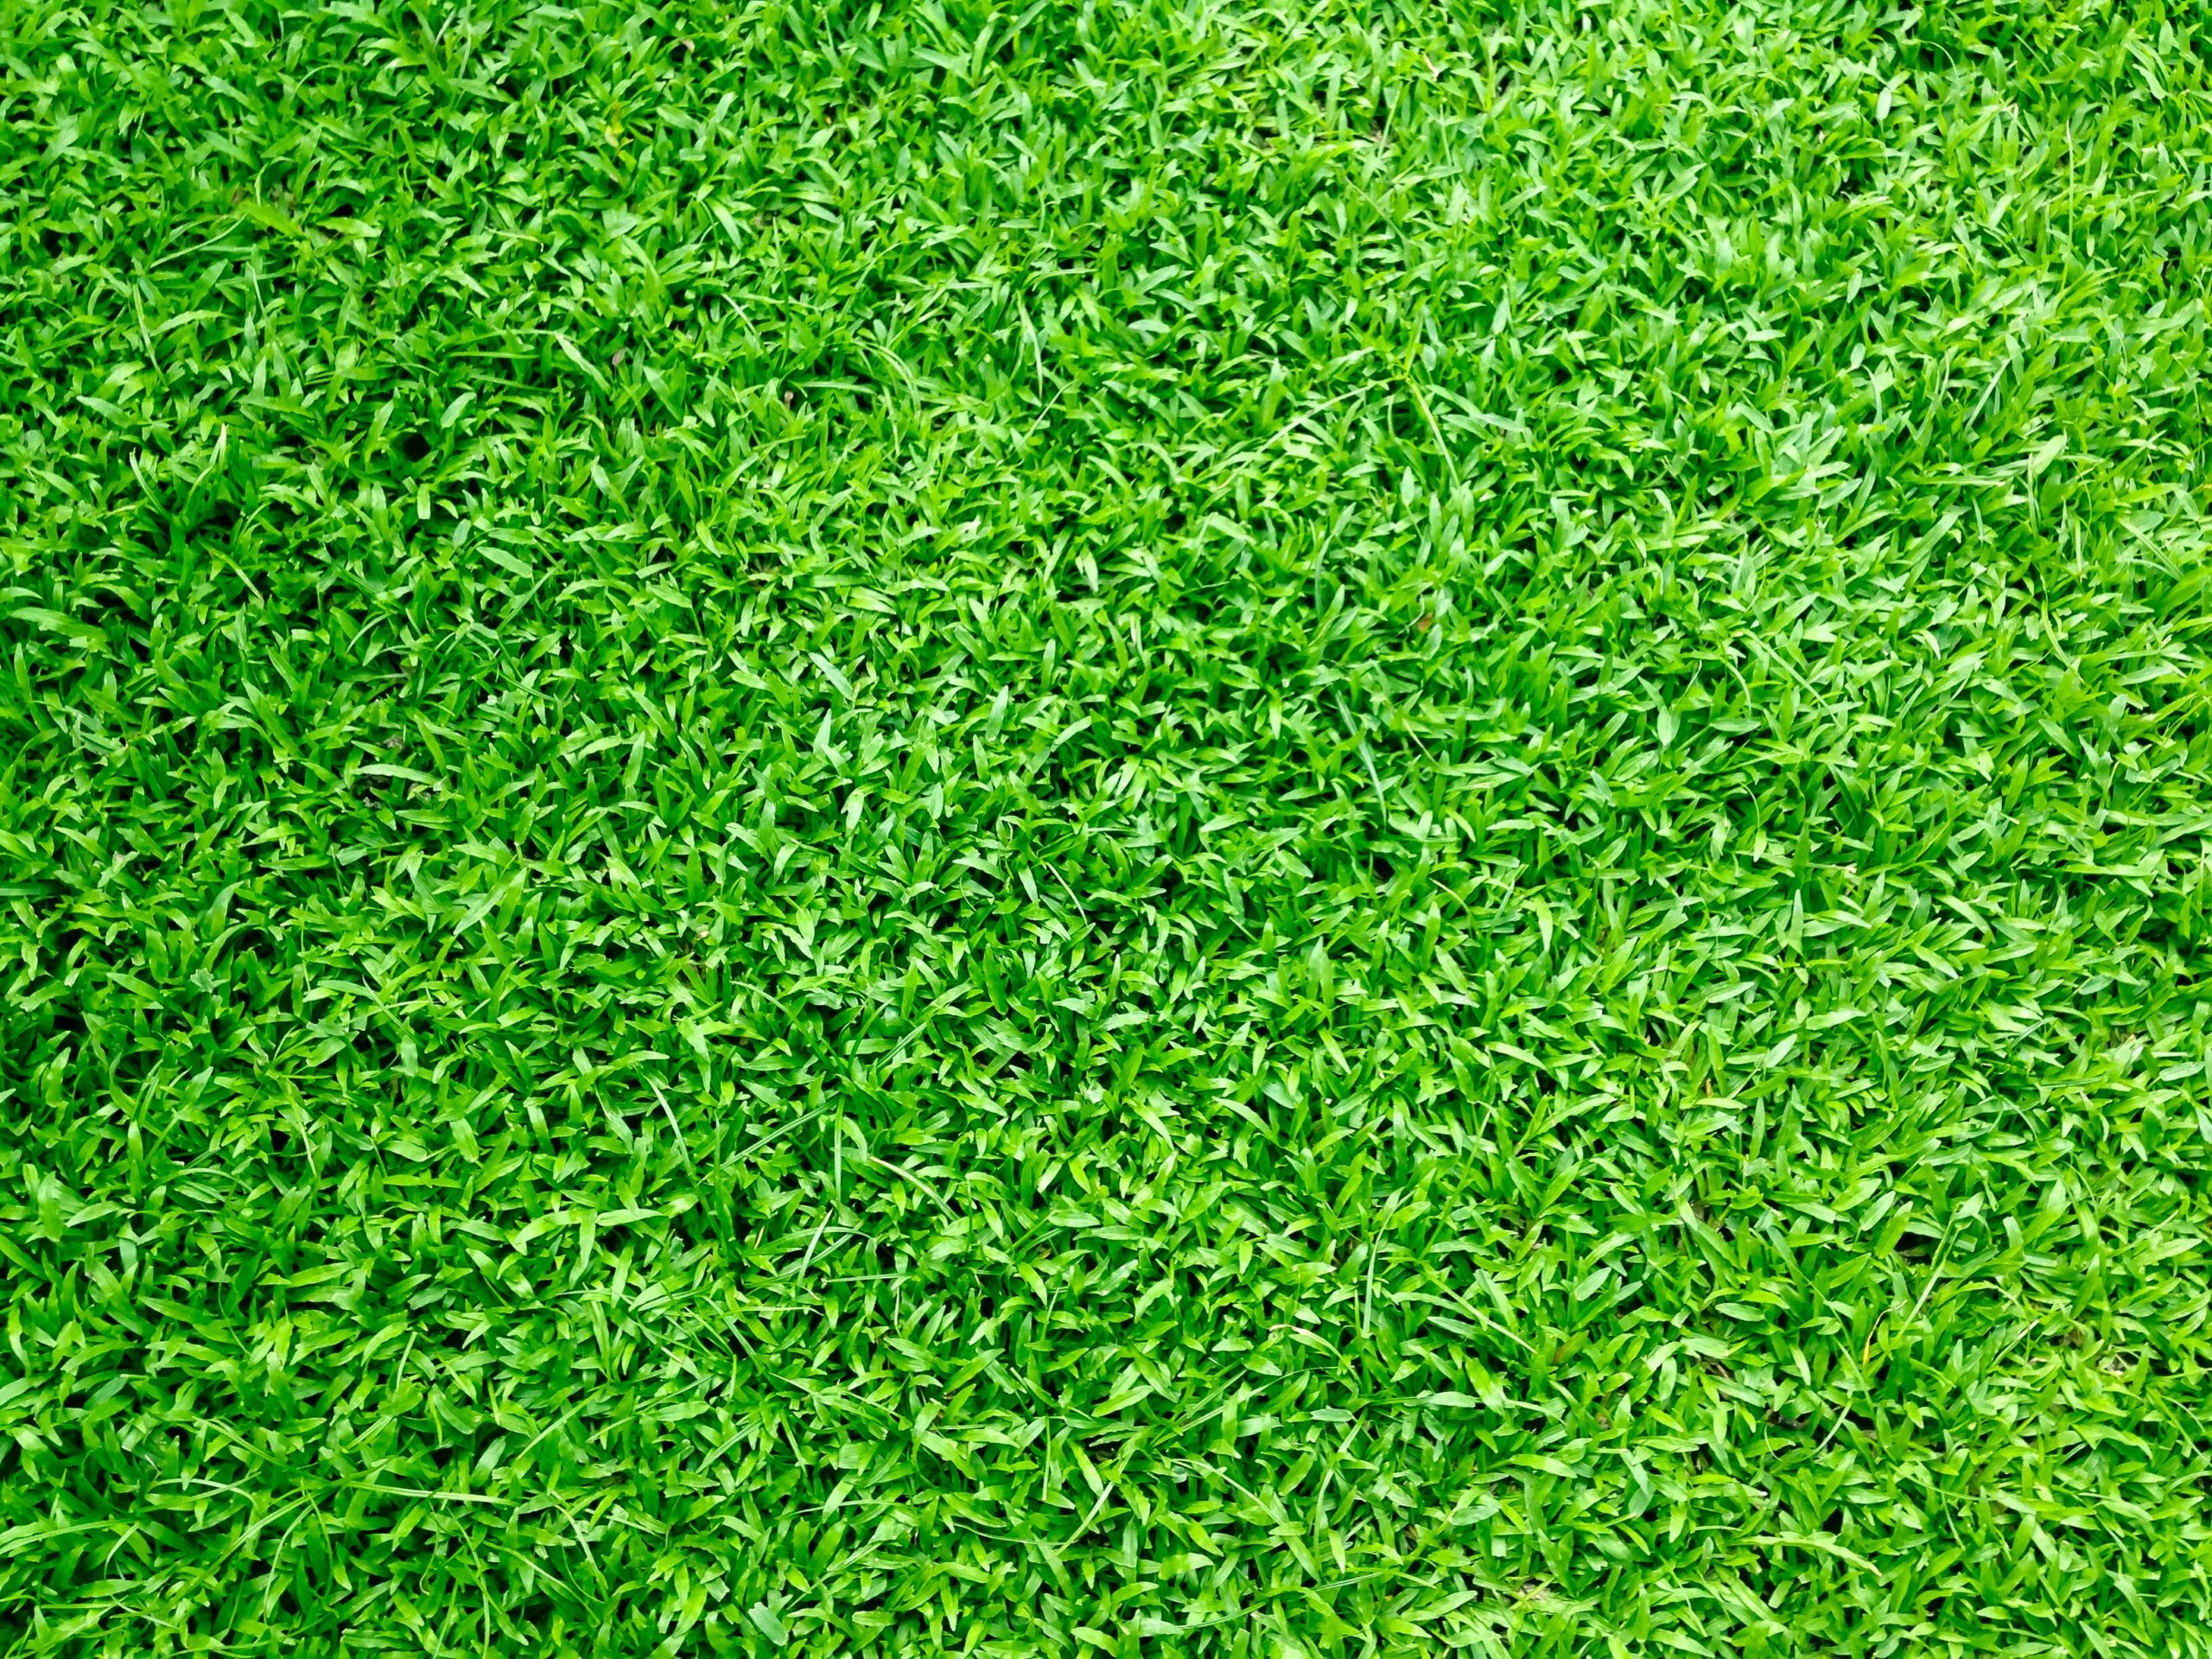 Is Artificial Grass Bad for the Environment